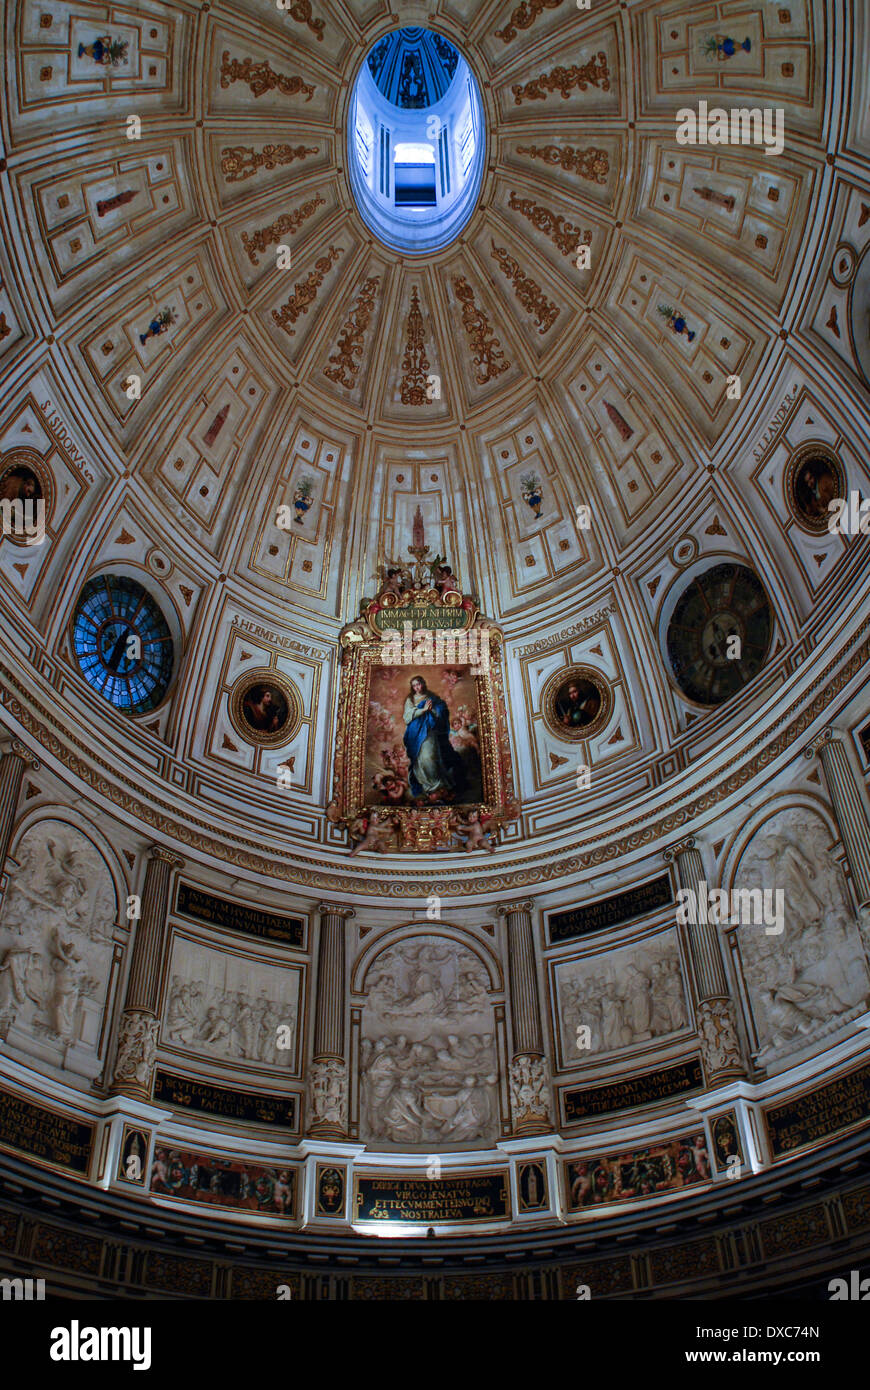 Dome in the Sala Capitular, Seville cathedral, Spain, Europe with Immaculate Conception by Murillo Stock Photo